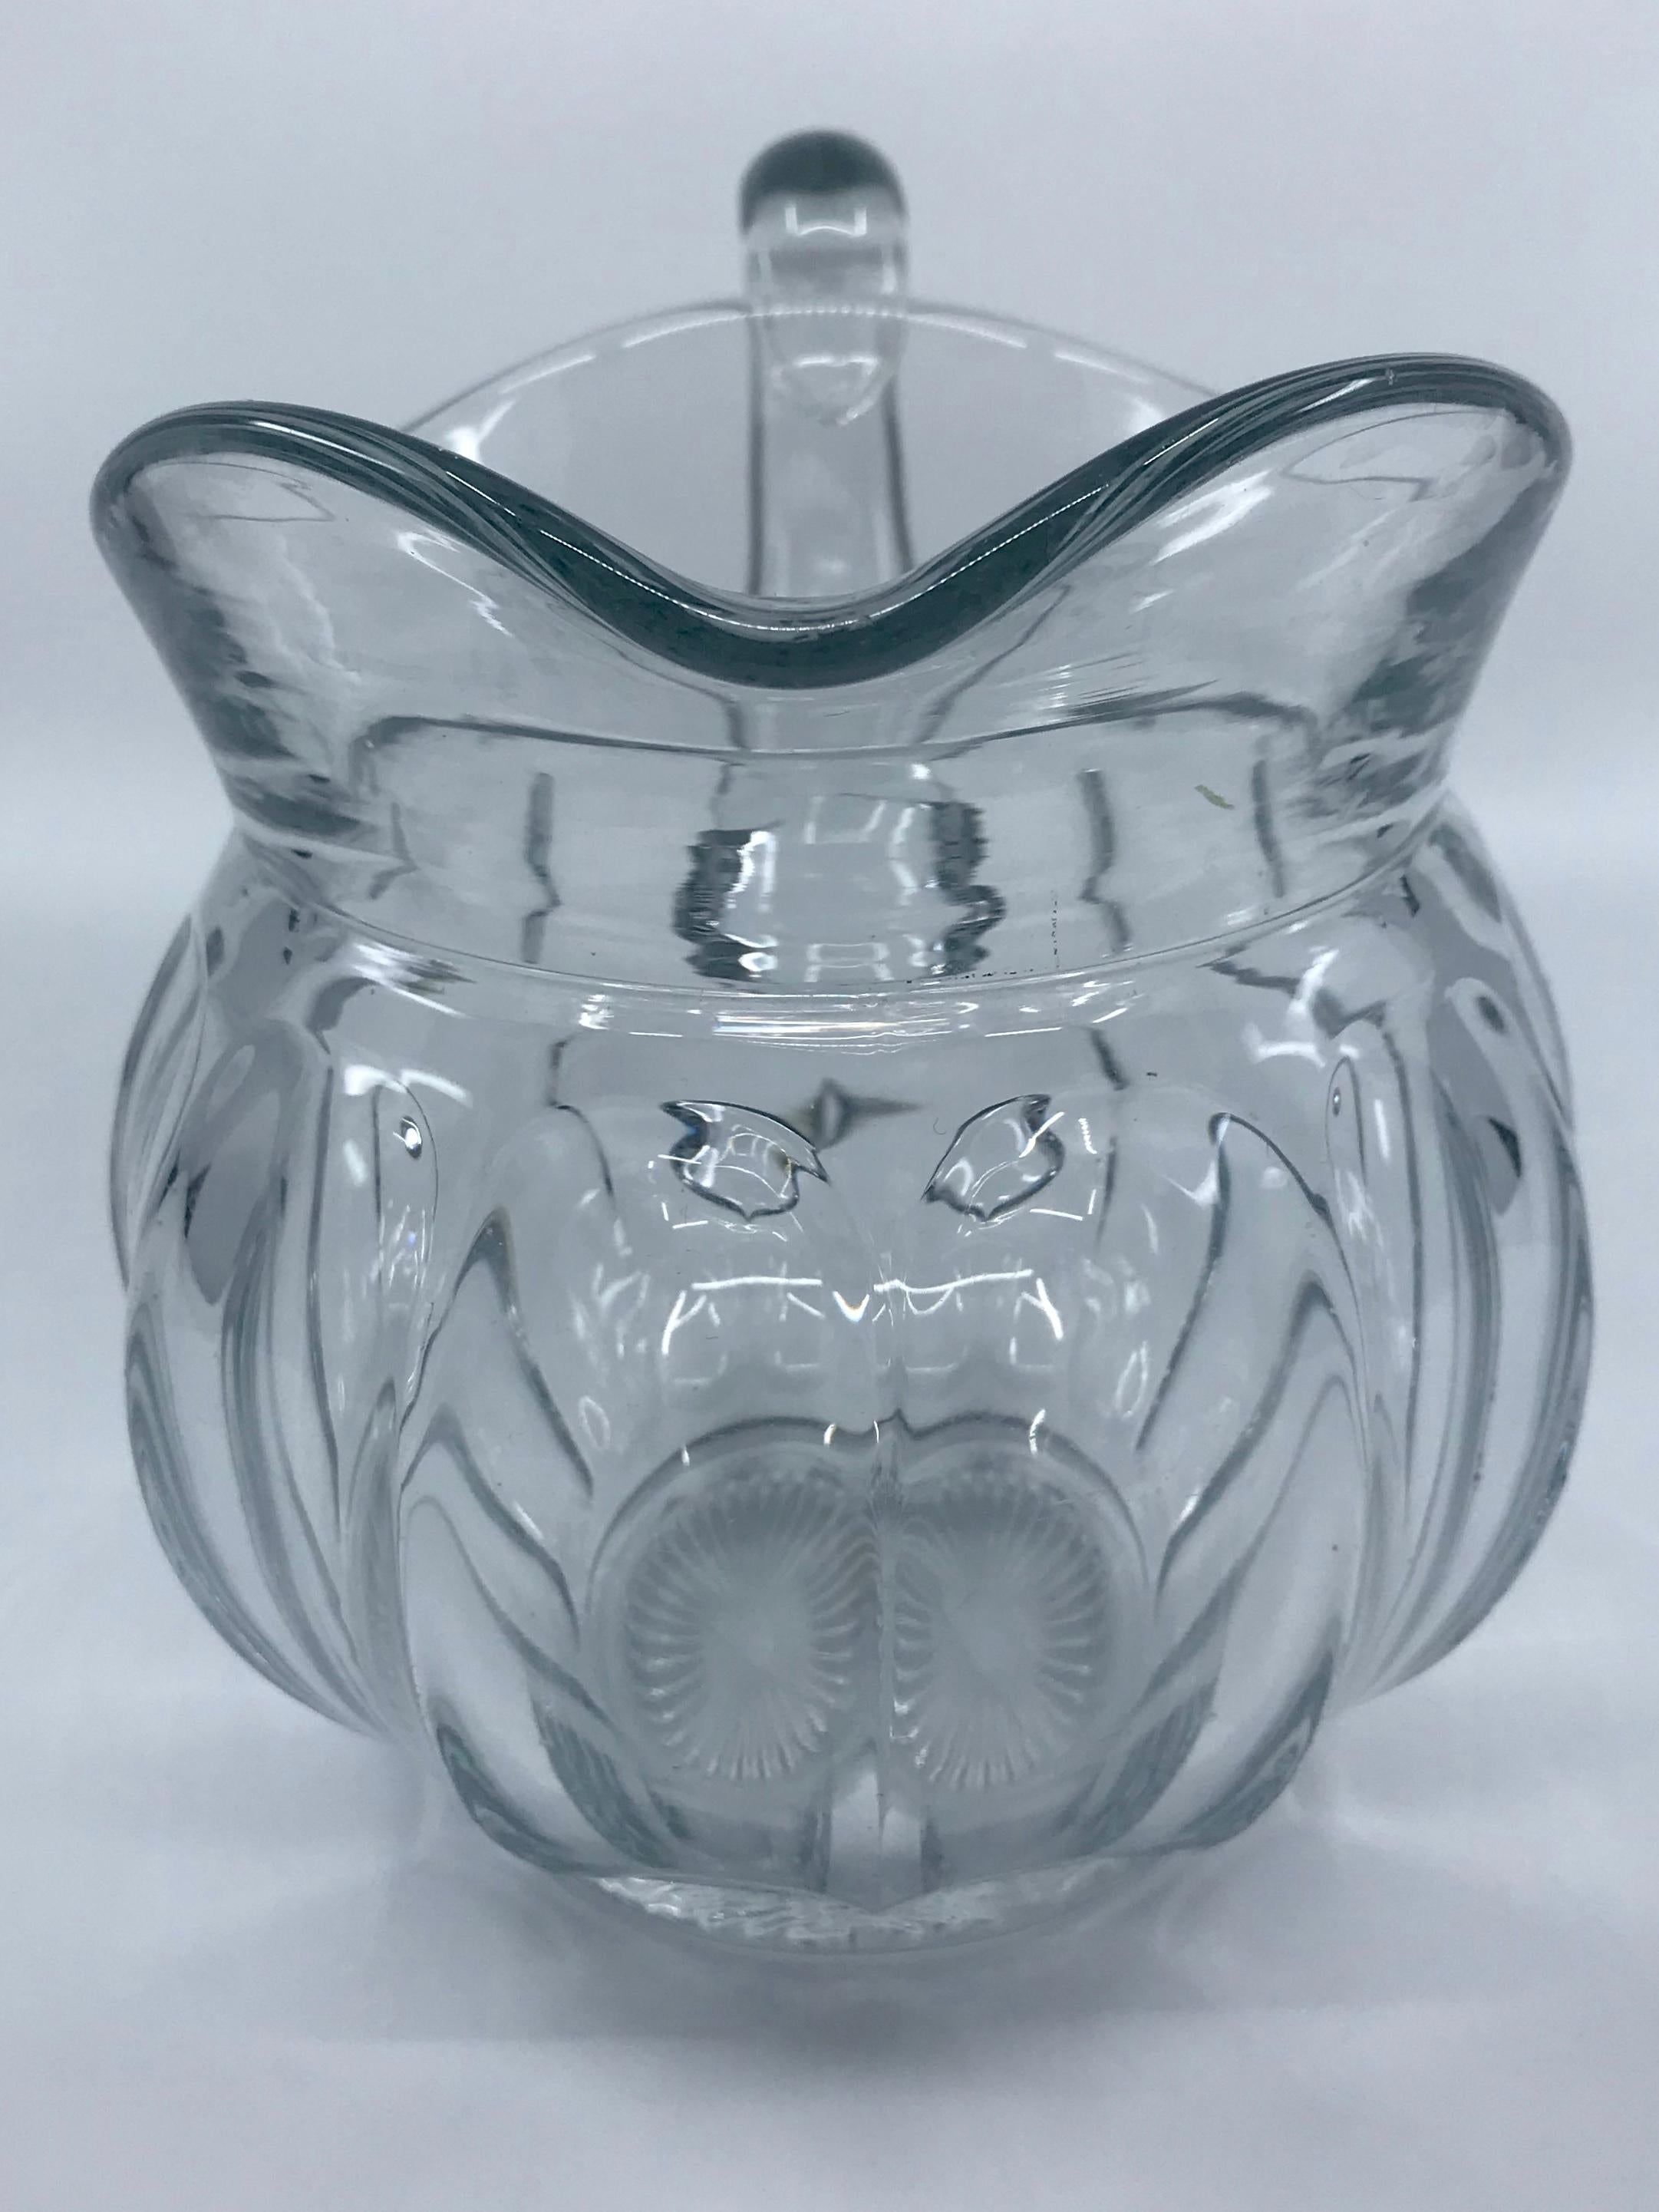 Paneled American glass pitcher. Vintage clear Heisey glass pitcher with bulbous paneled form and cut starburst to bottom with trademark for A.H. Heisey & Co  of H within the diamond mark. United States first half 20th century
Dimensions: 6.25